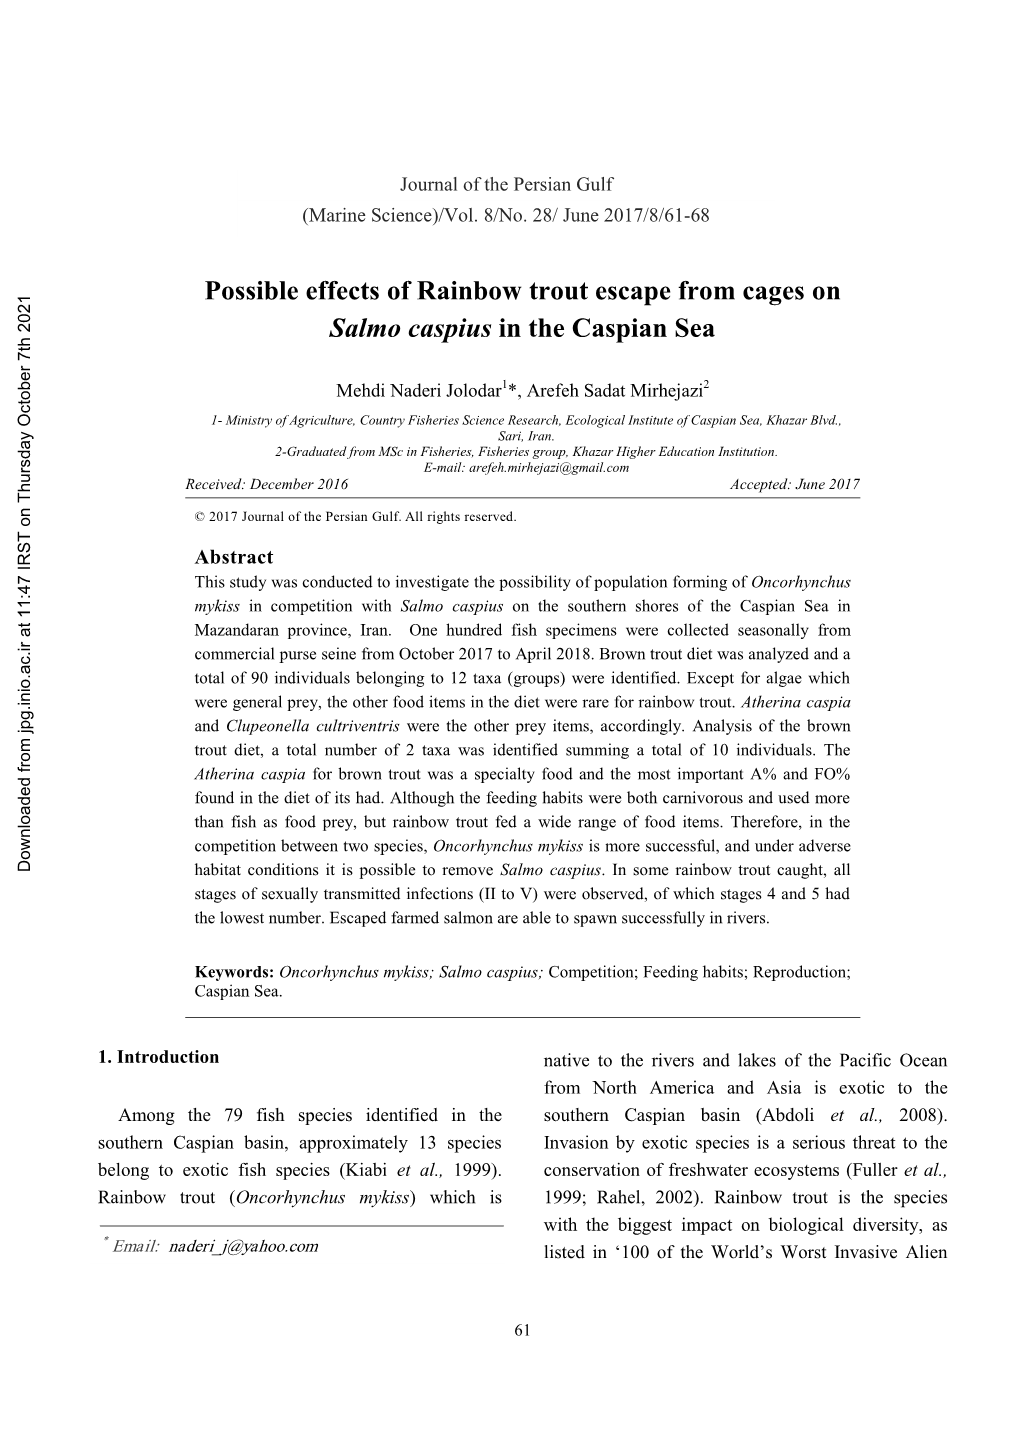 Possible Effects of Rainbow Trout Escape from Cages on Salmo Caspius in the Caspian Sea